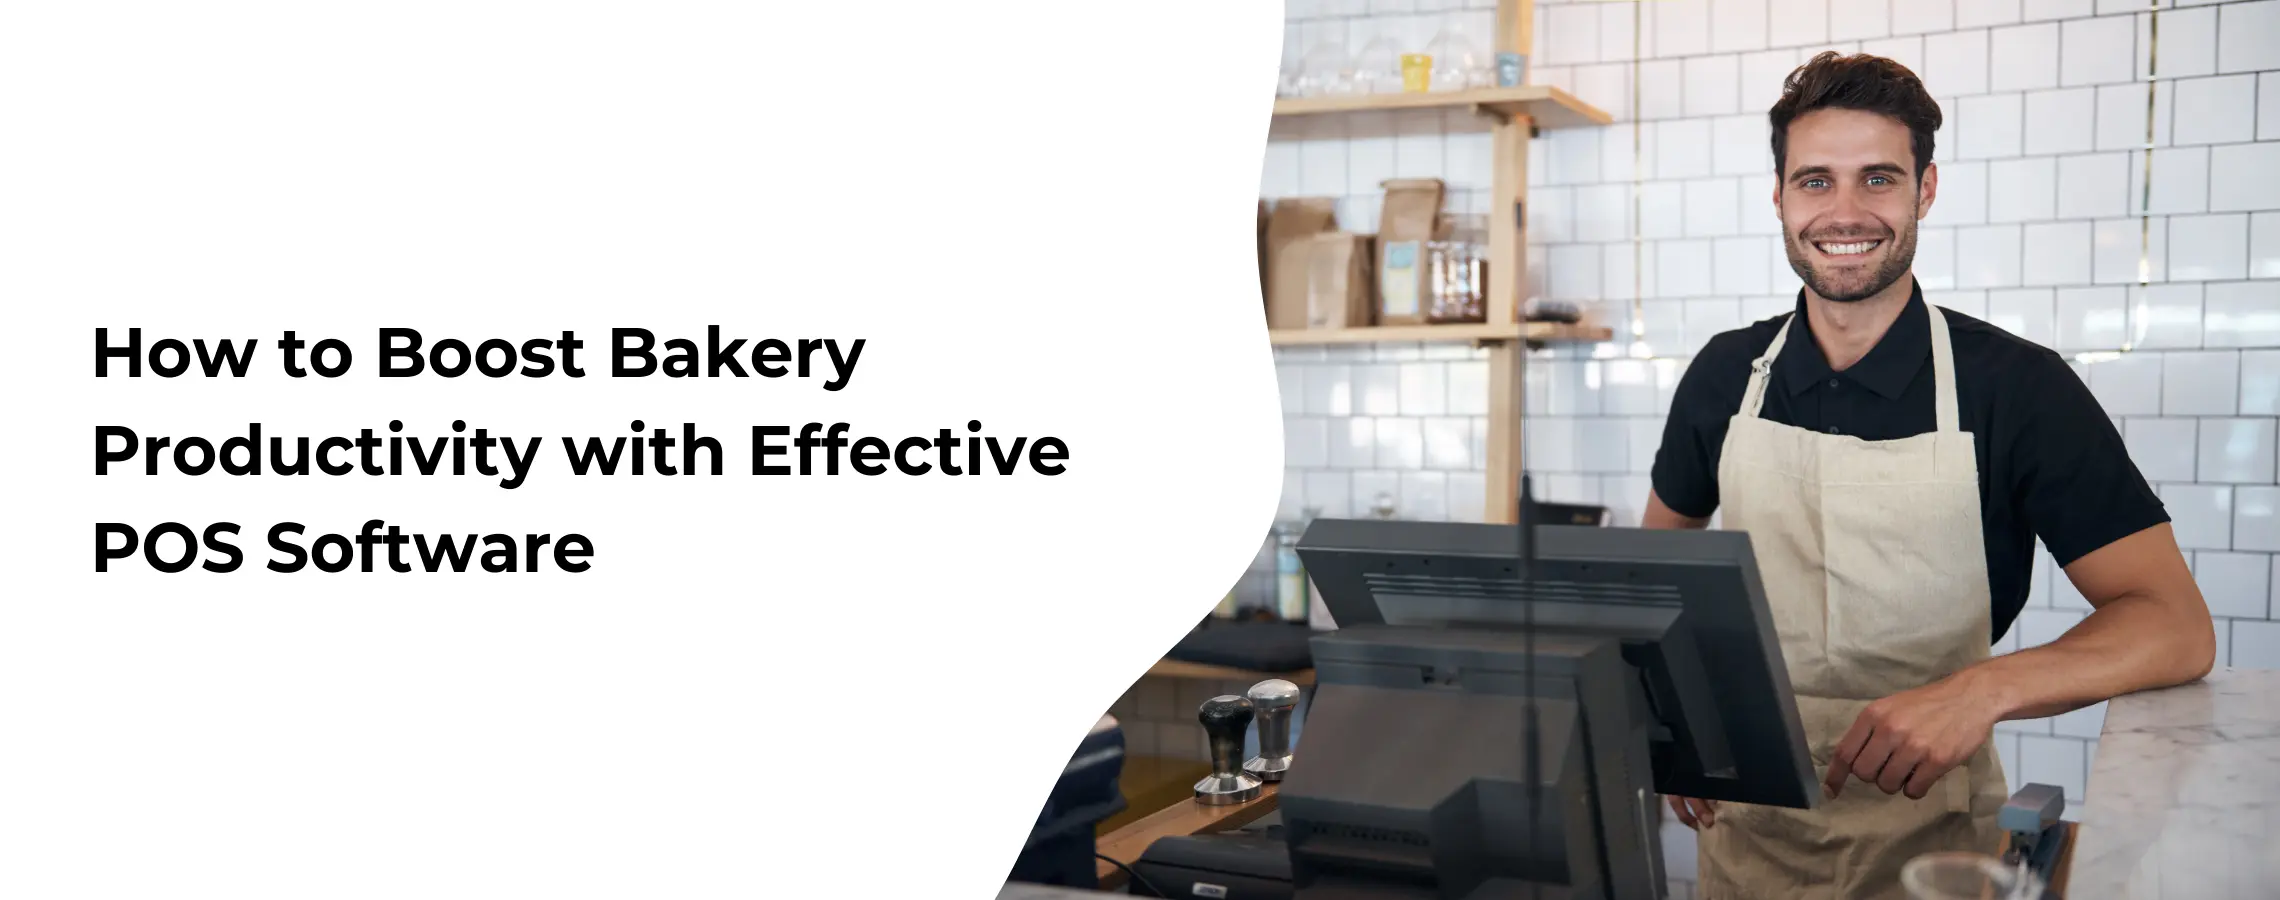 How to Boost Bakery Productivity with Effective POS Software